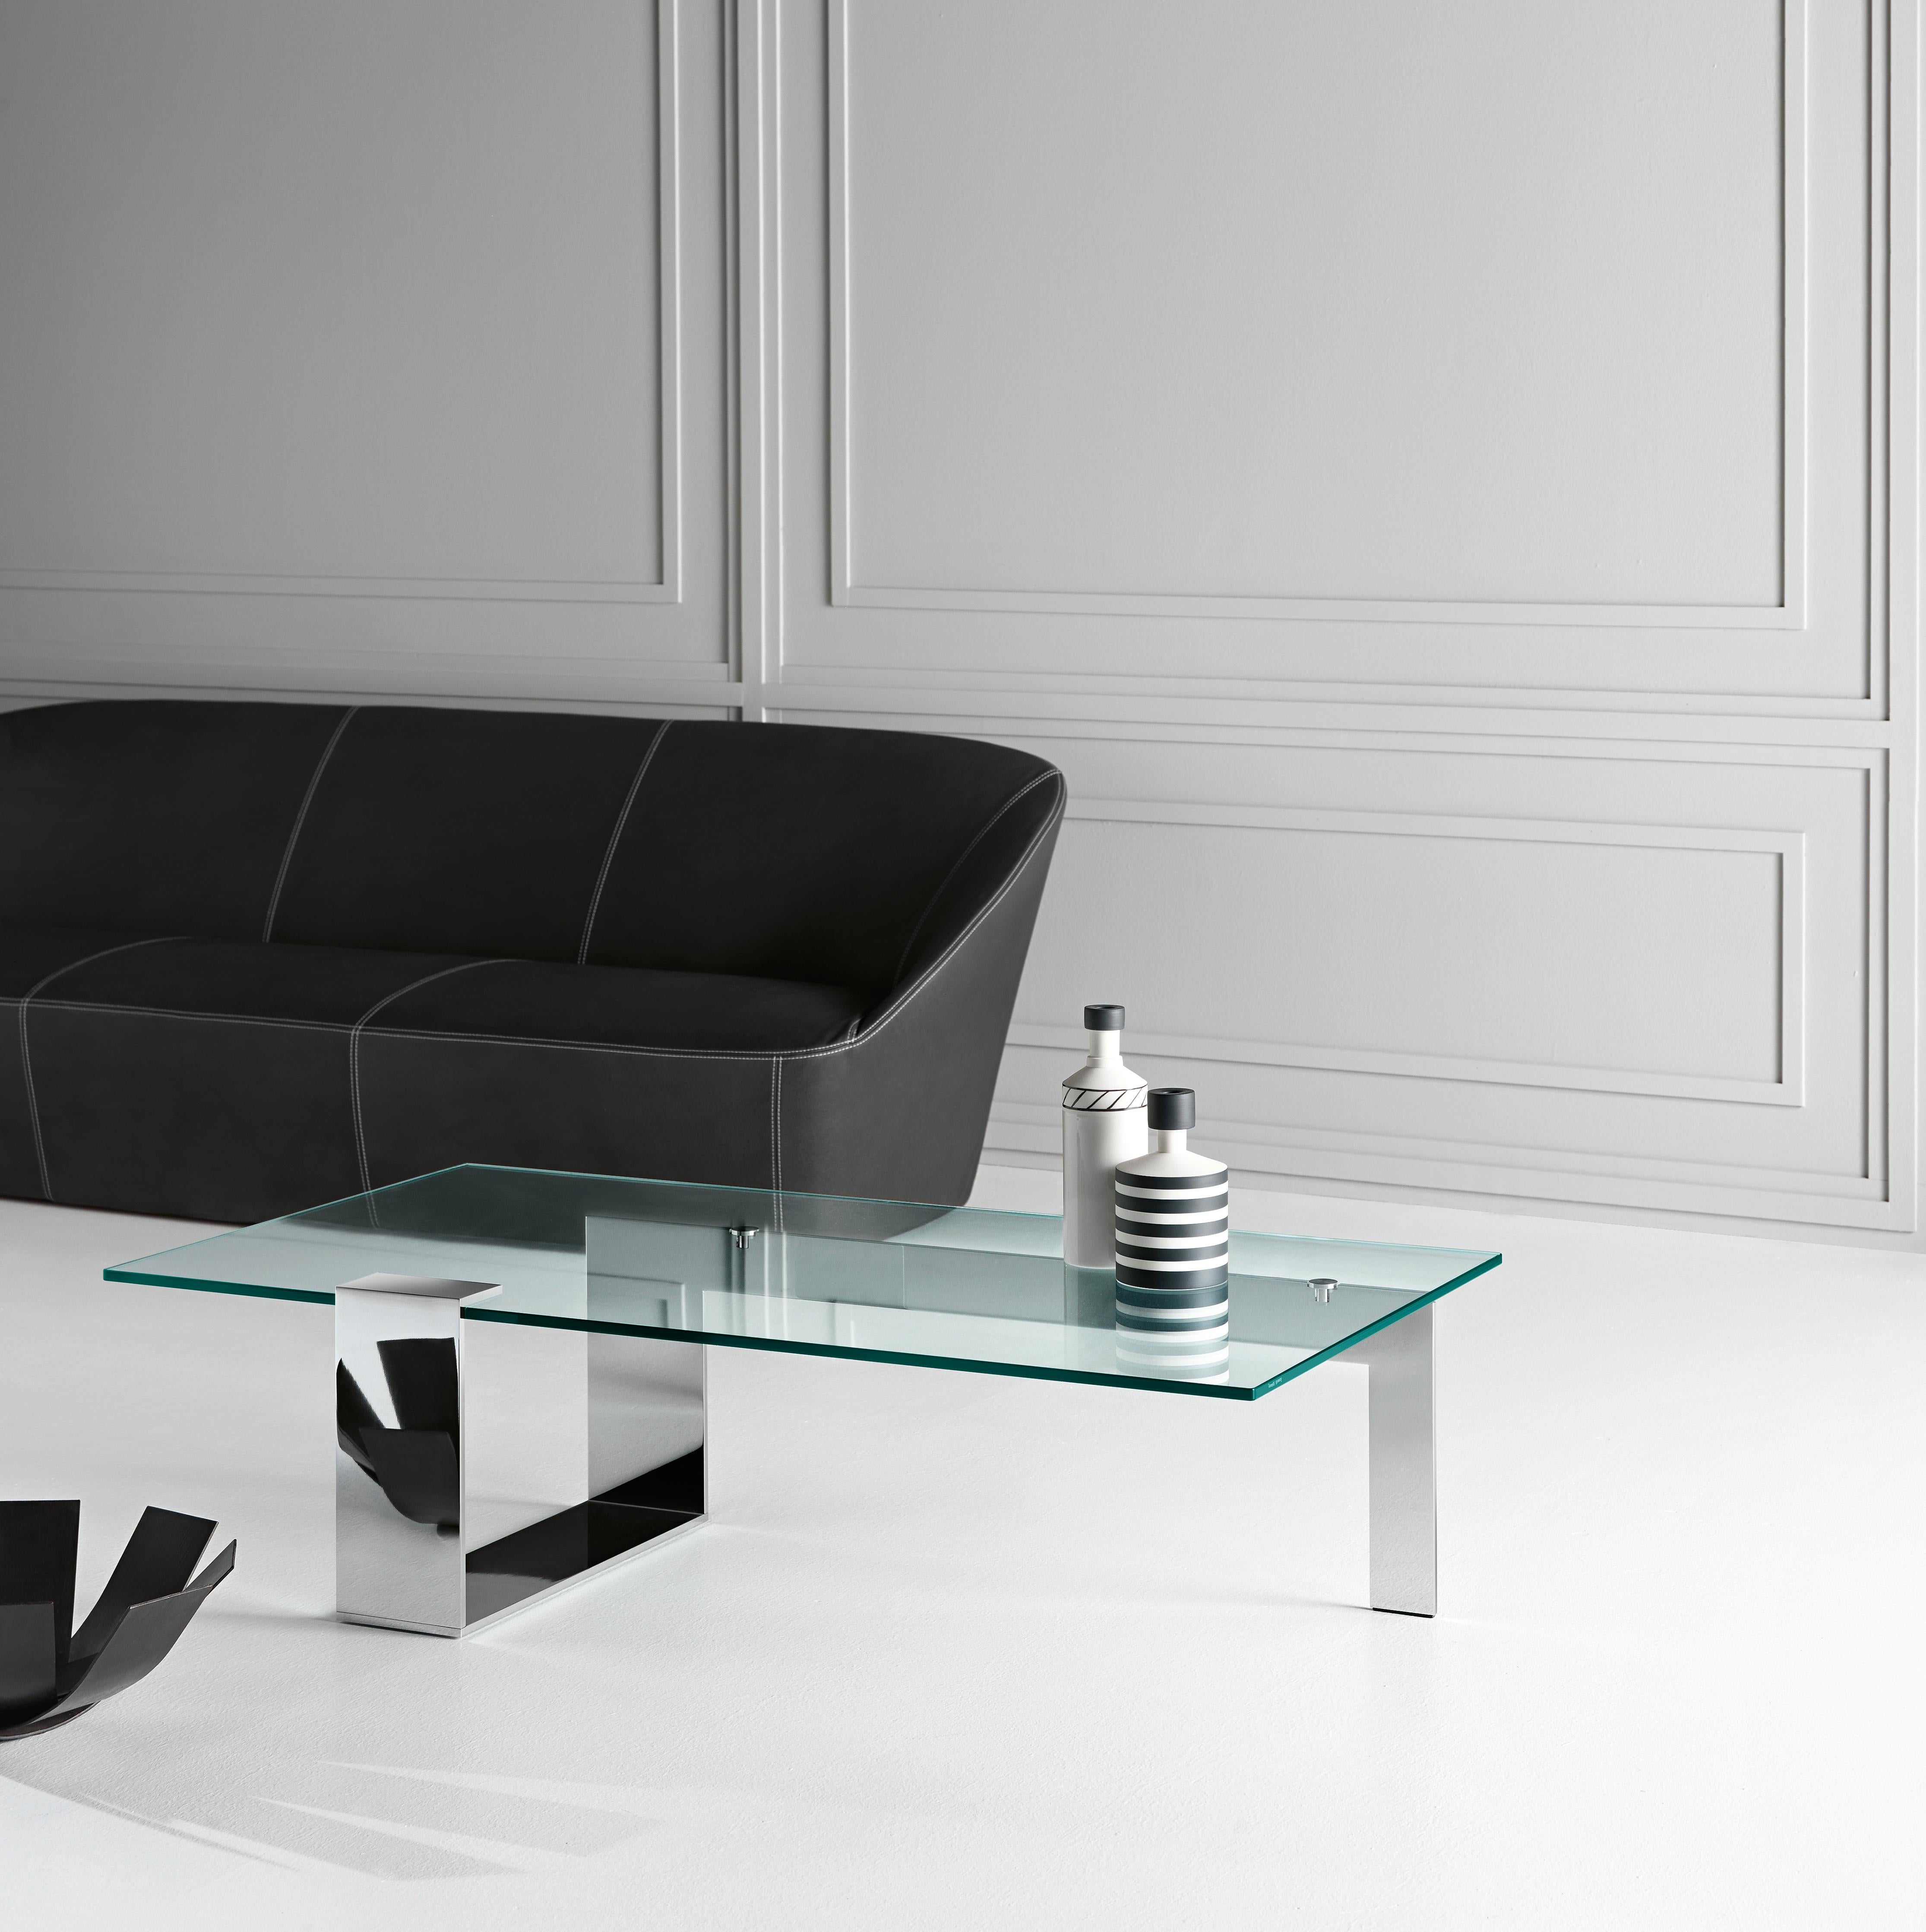 Italian Plinsky Glass Coffee Table, Designed by Giulio Mancini, Made in Italy For Sale